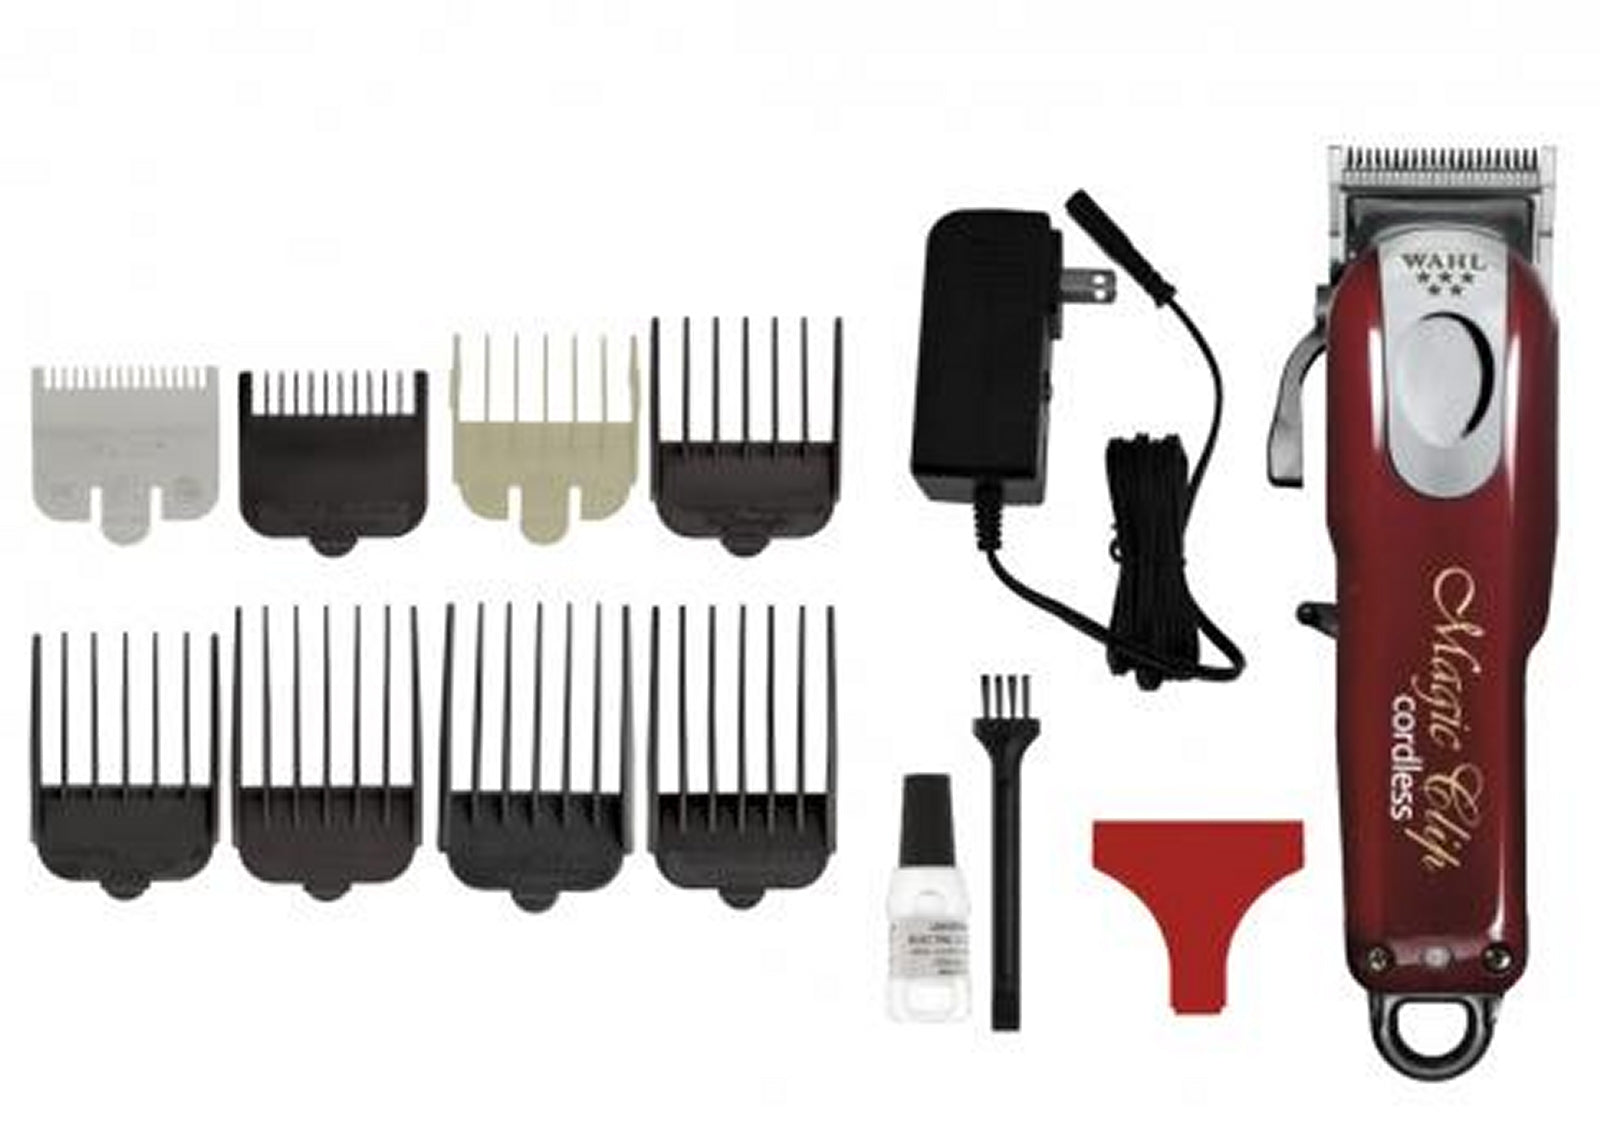 wahl 5 star cordless trimmer